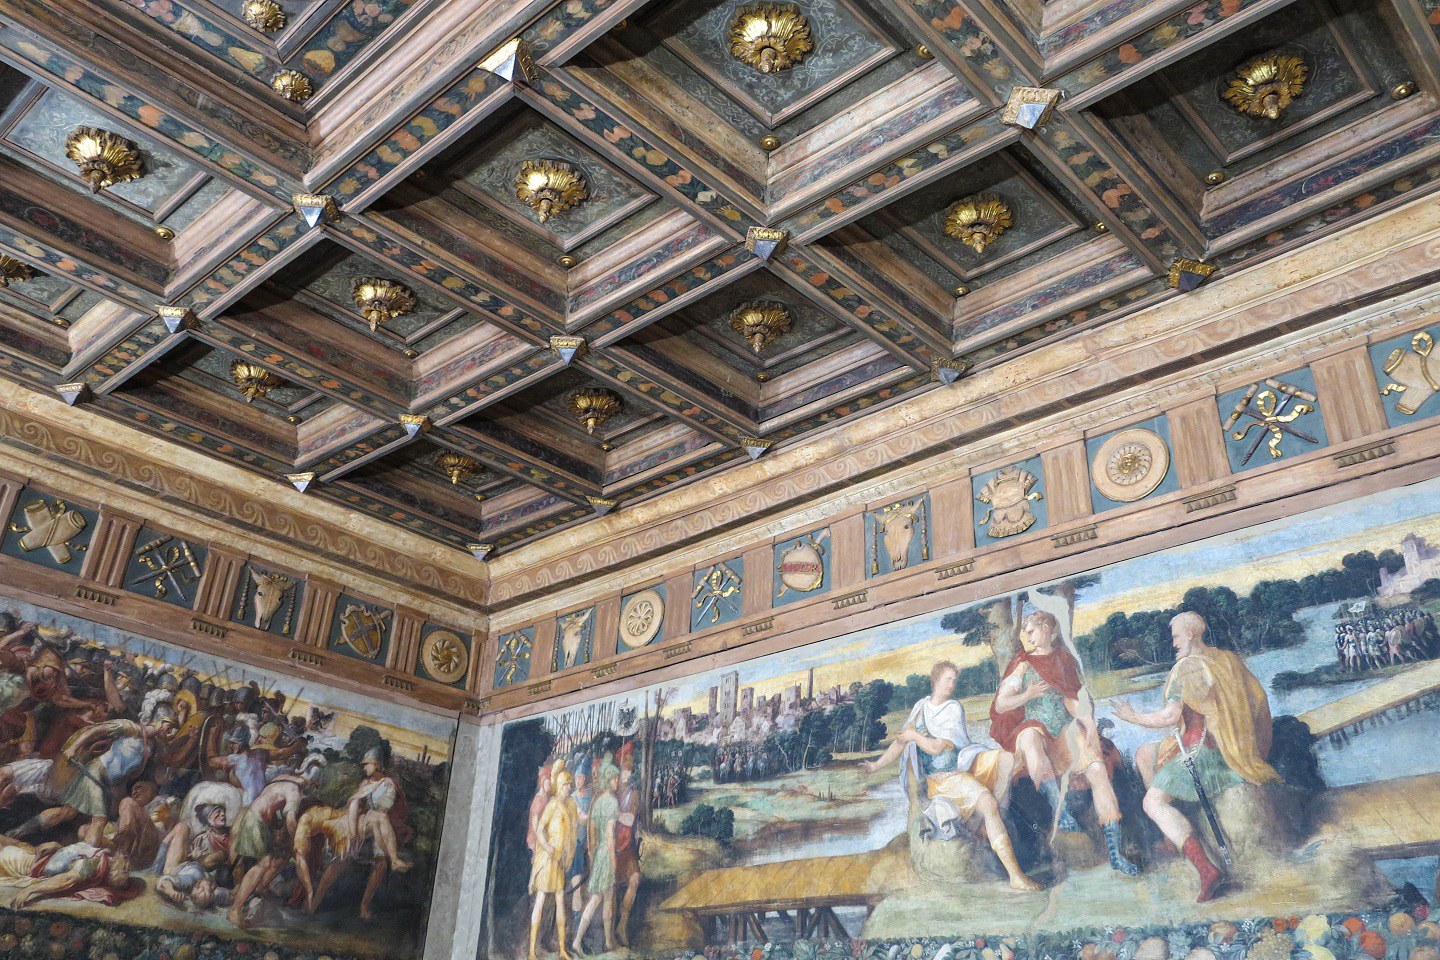 Reserve tickets for the “Sale Storiche” (historic rooms) of Modena’s Palazzo Comunale